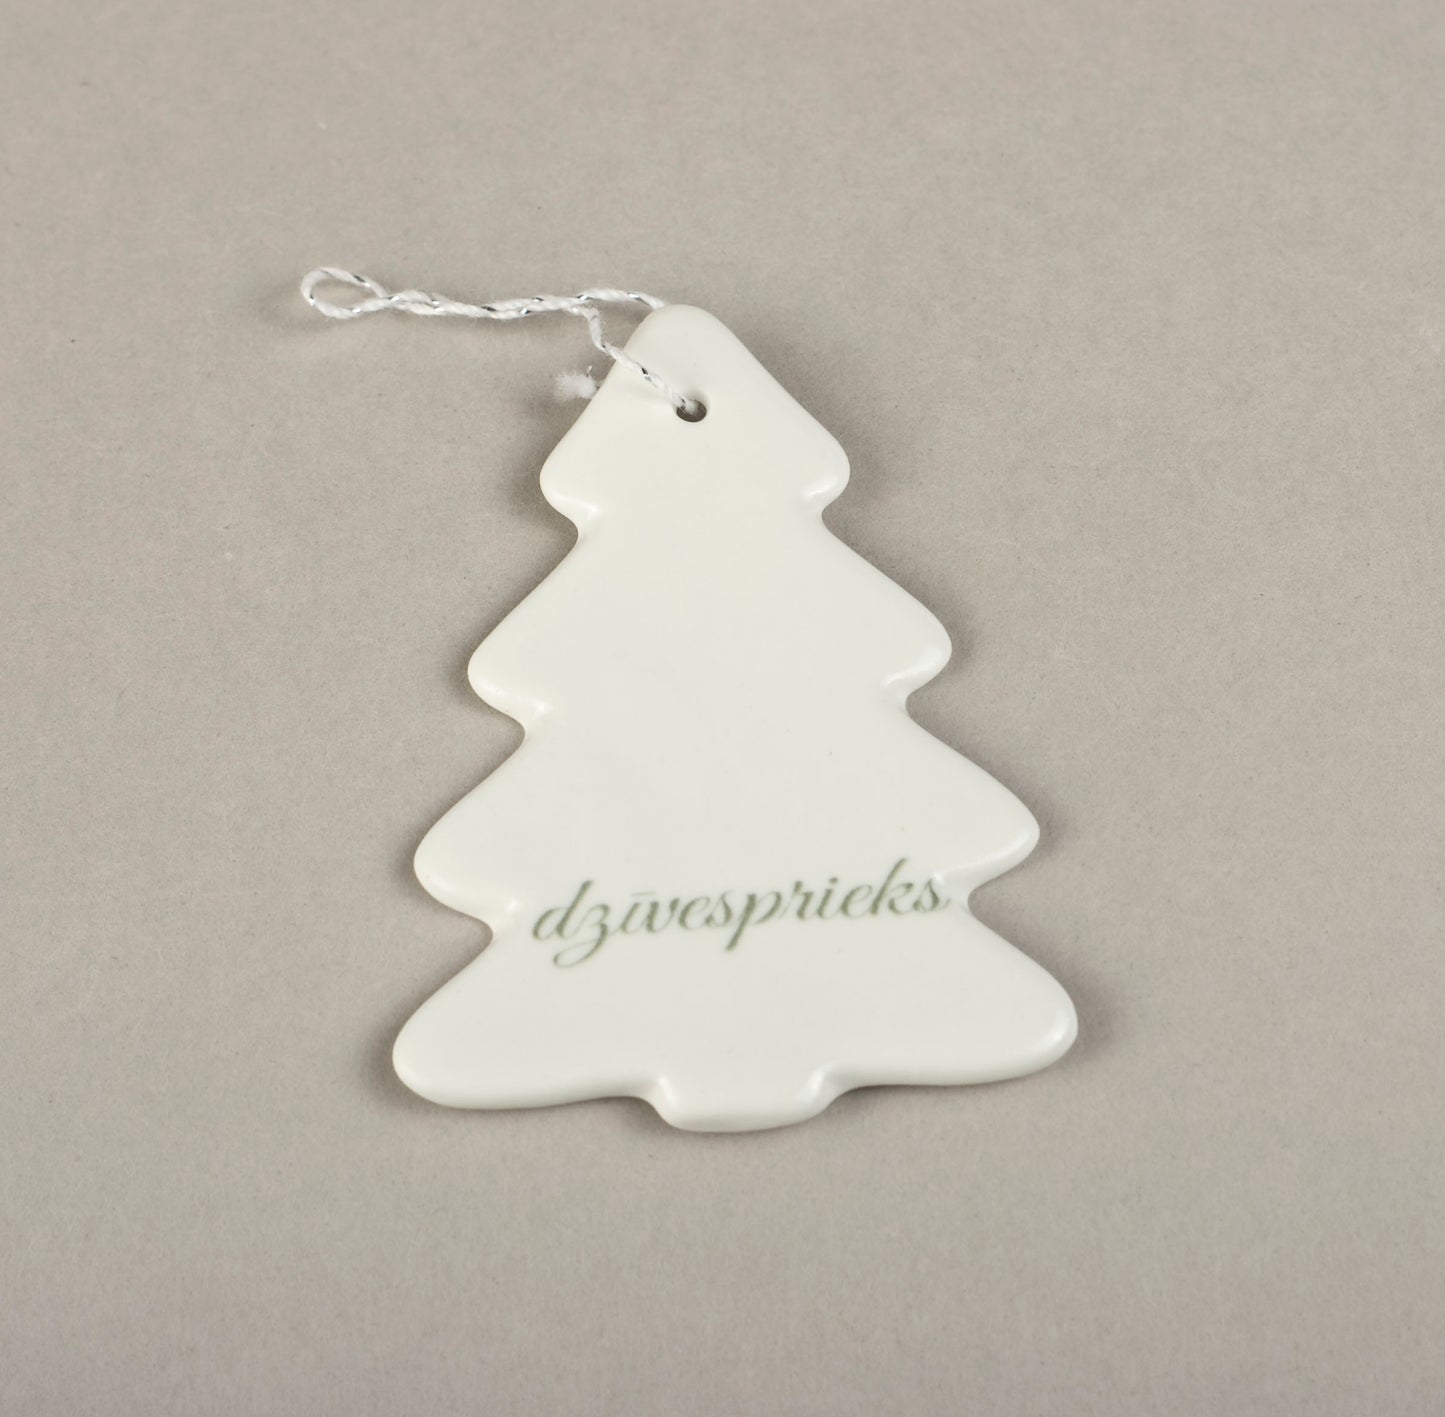 Porcelain Decorations For Christmas Trees - Christmas Tree With Print